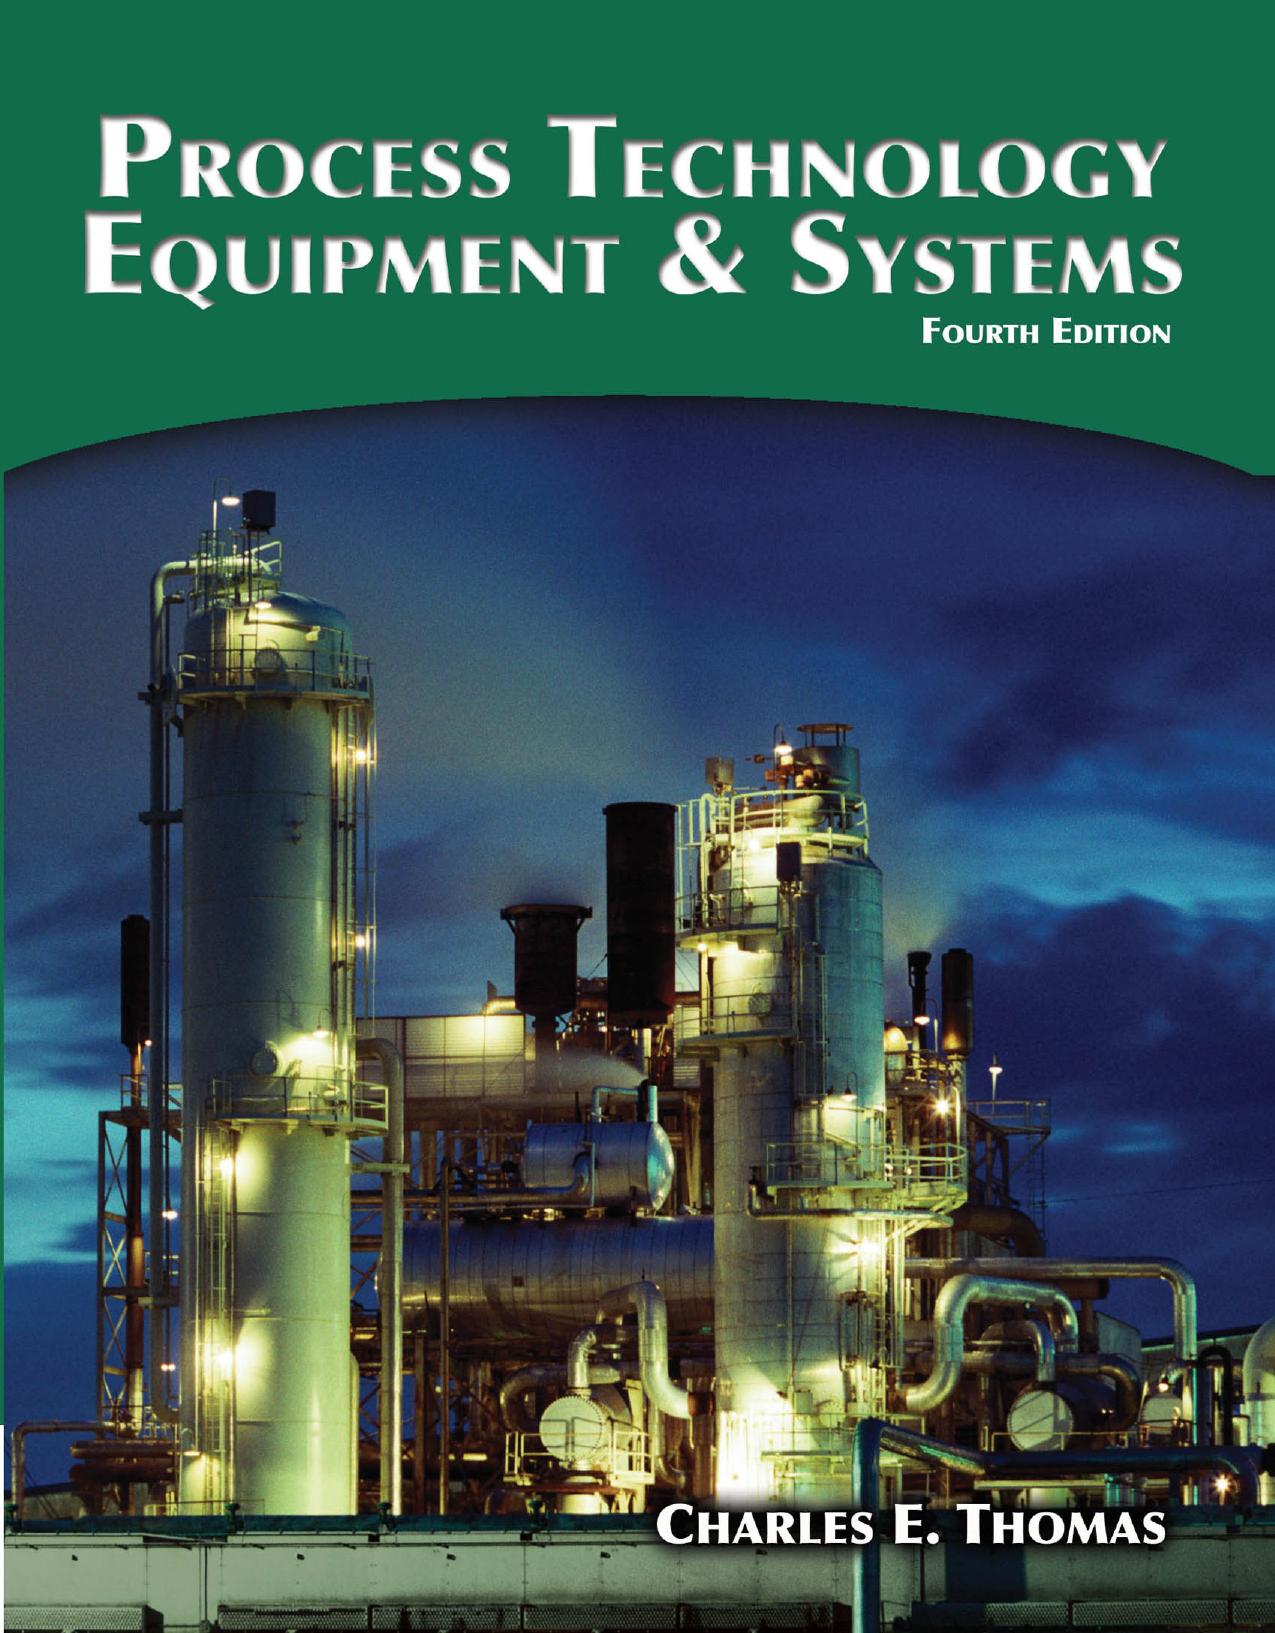 Process Technology Equipment and Systems, Fourth Edition